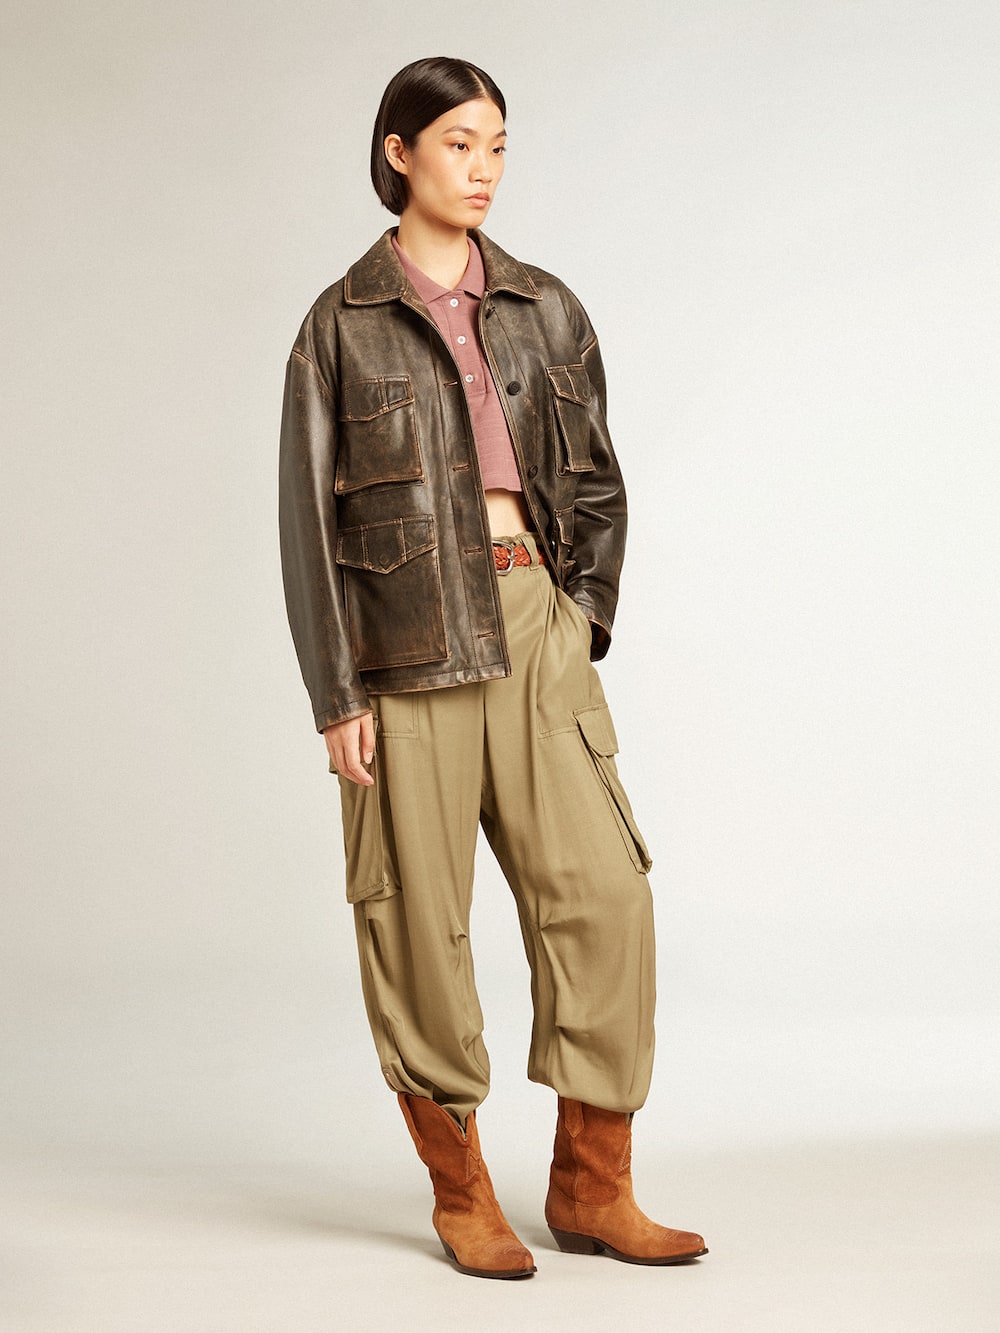 Golden Goose - Cropped-Polohemd aus Baumwollpikee in Rosa-Taupe in 